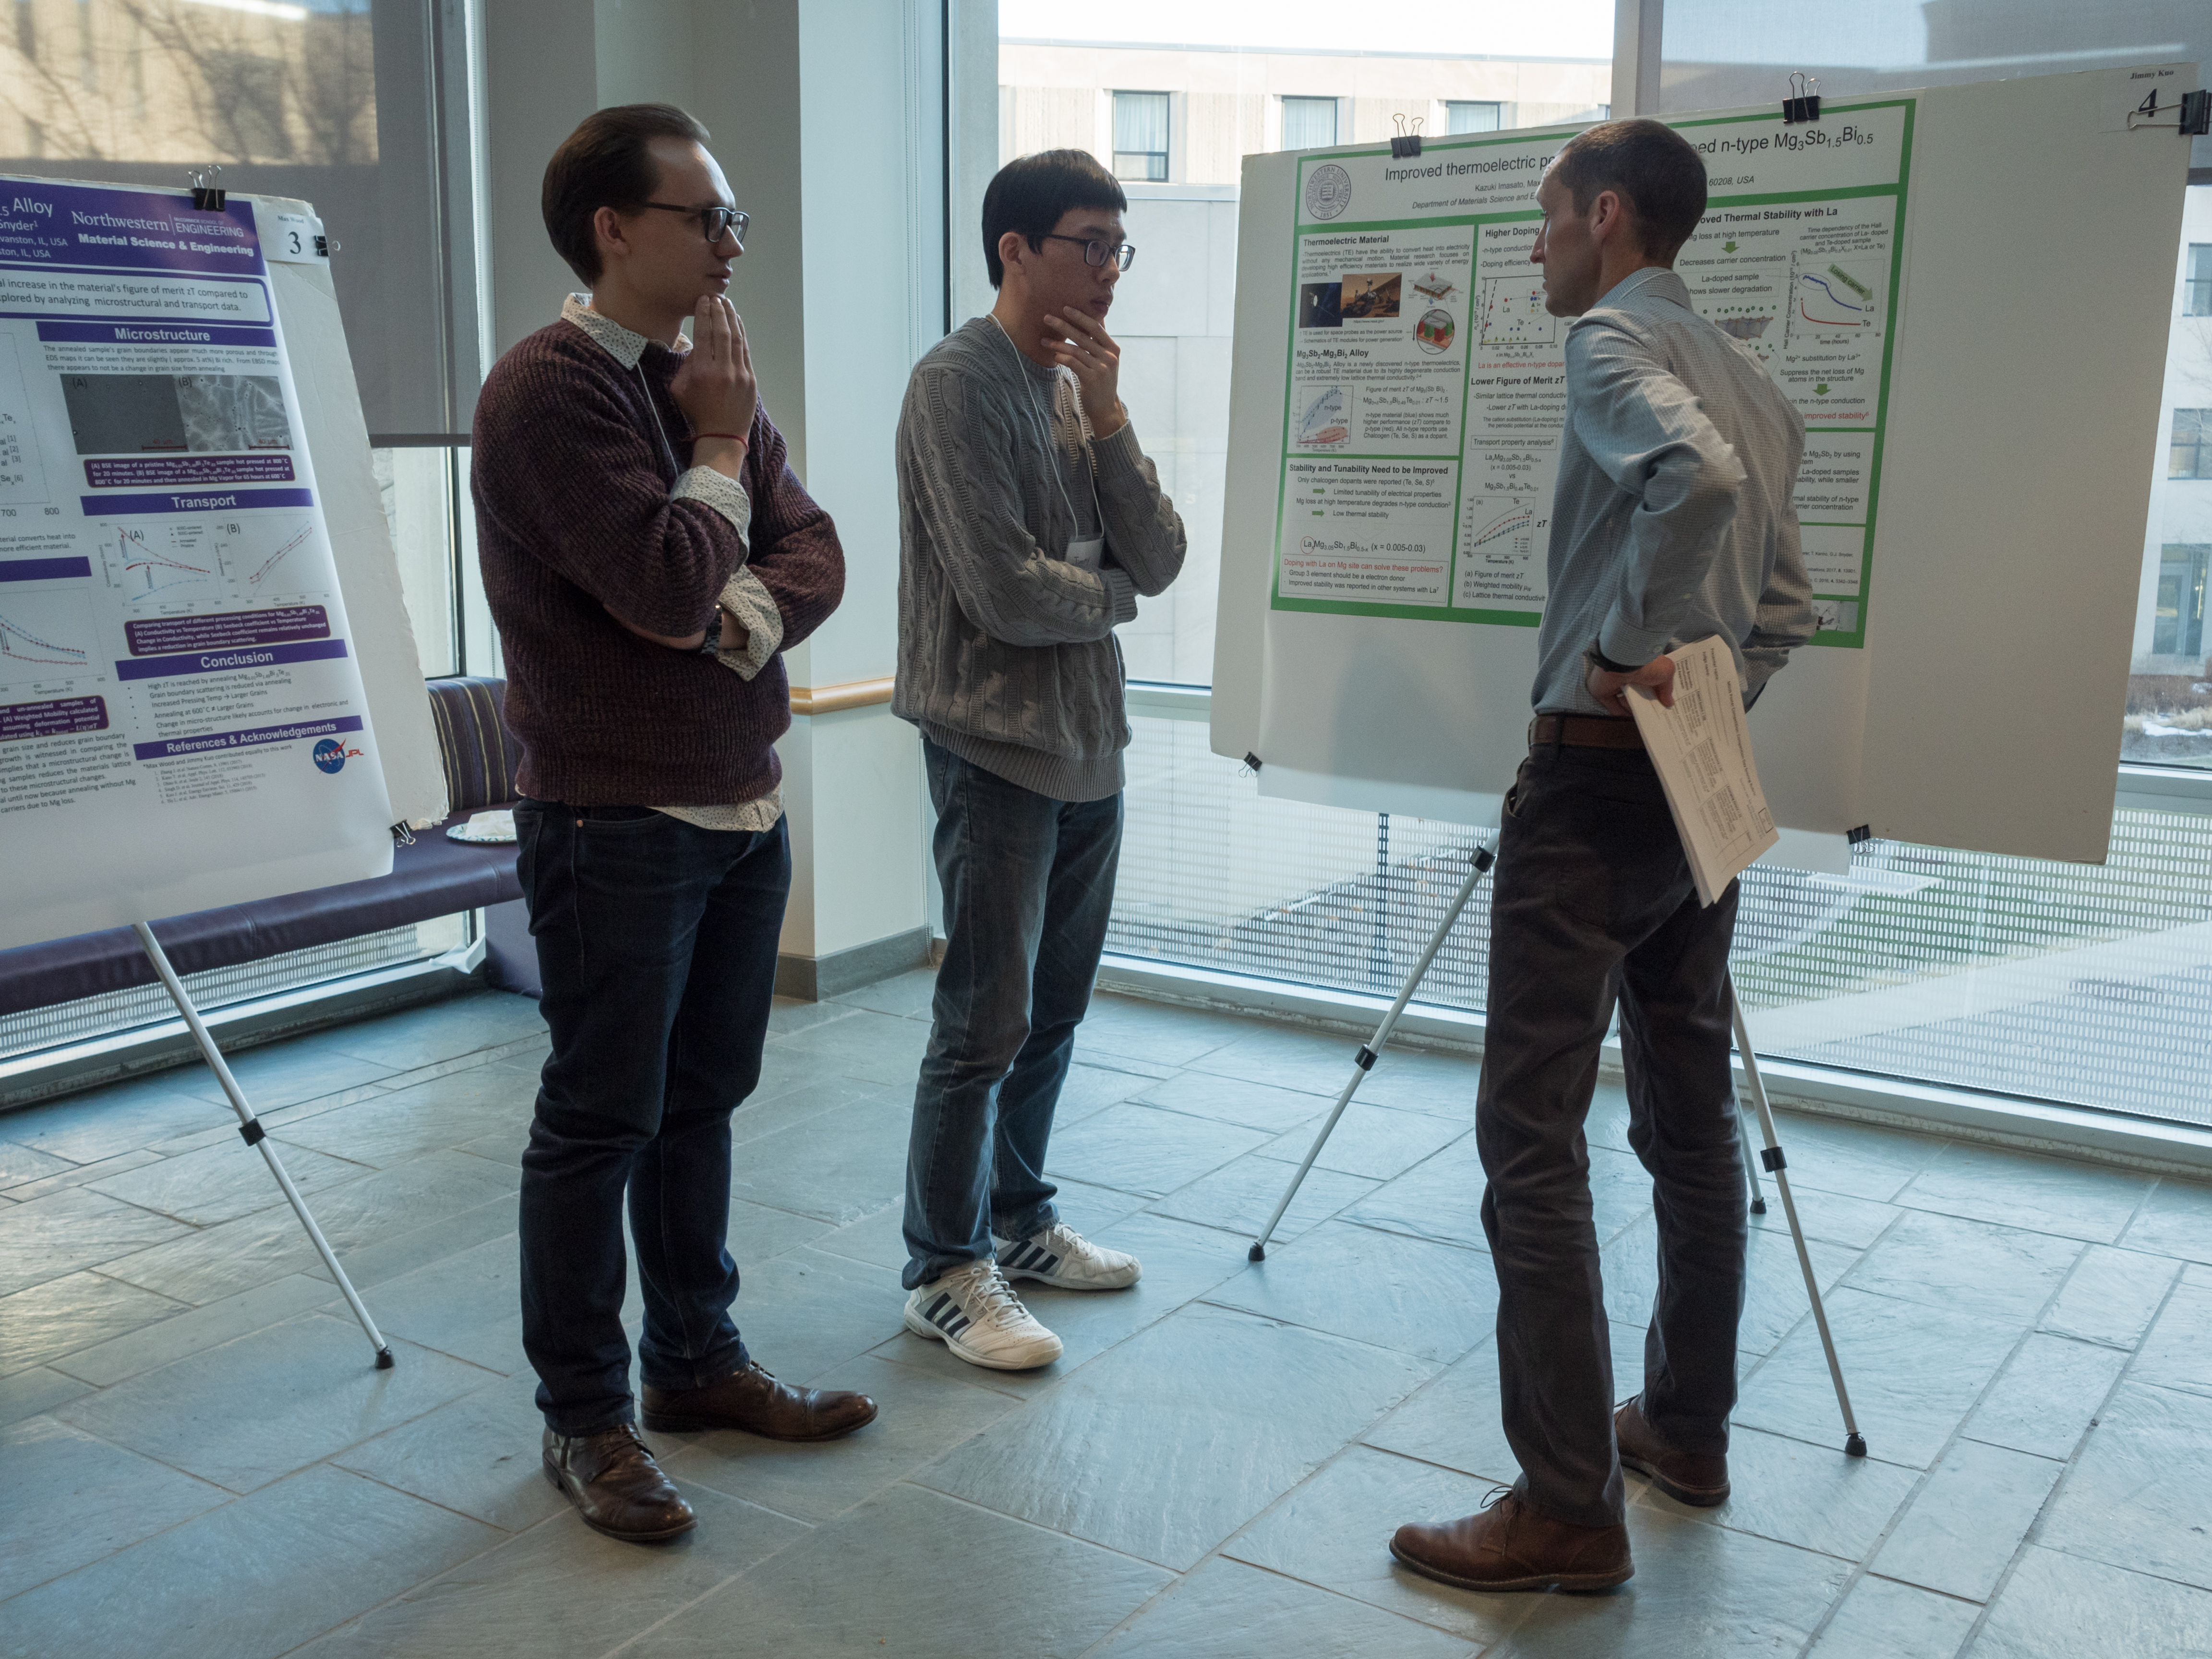 Judging in action! Poster presenters Max Wood and Jimmy Kuo judged by Prof. Lincoln Lauhon.